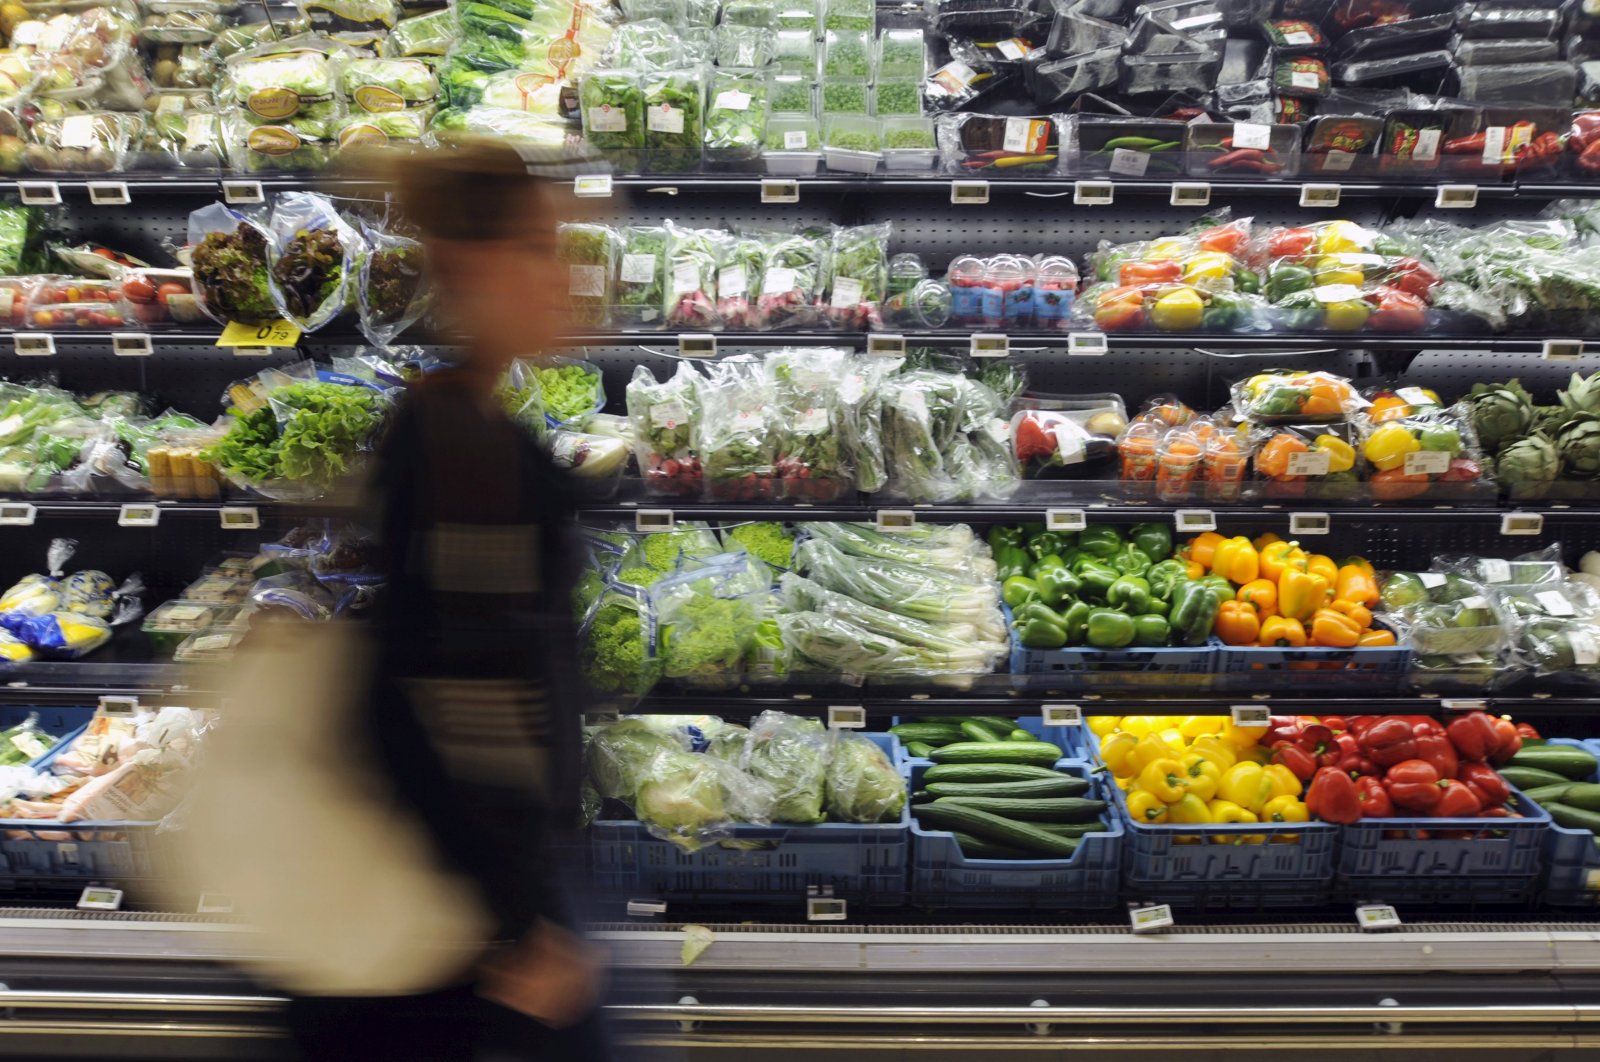 A customer walks past the fruit and vegetable section of a Carrefour grocery store in Brussels, Belgium, Sept. 4, 2014. (Reuters Photo)